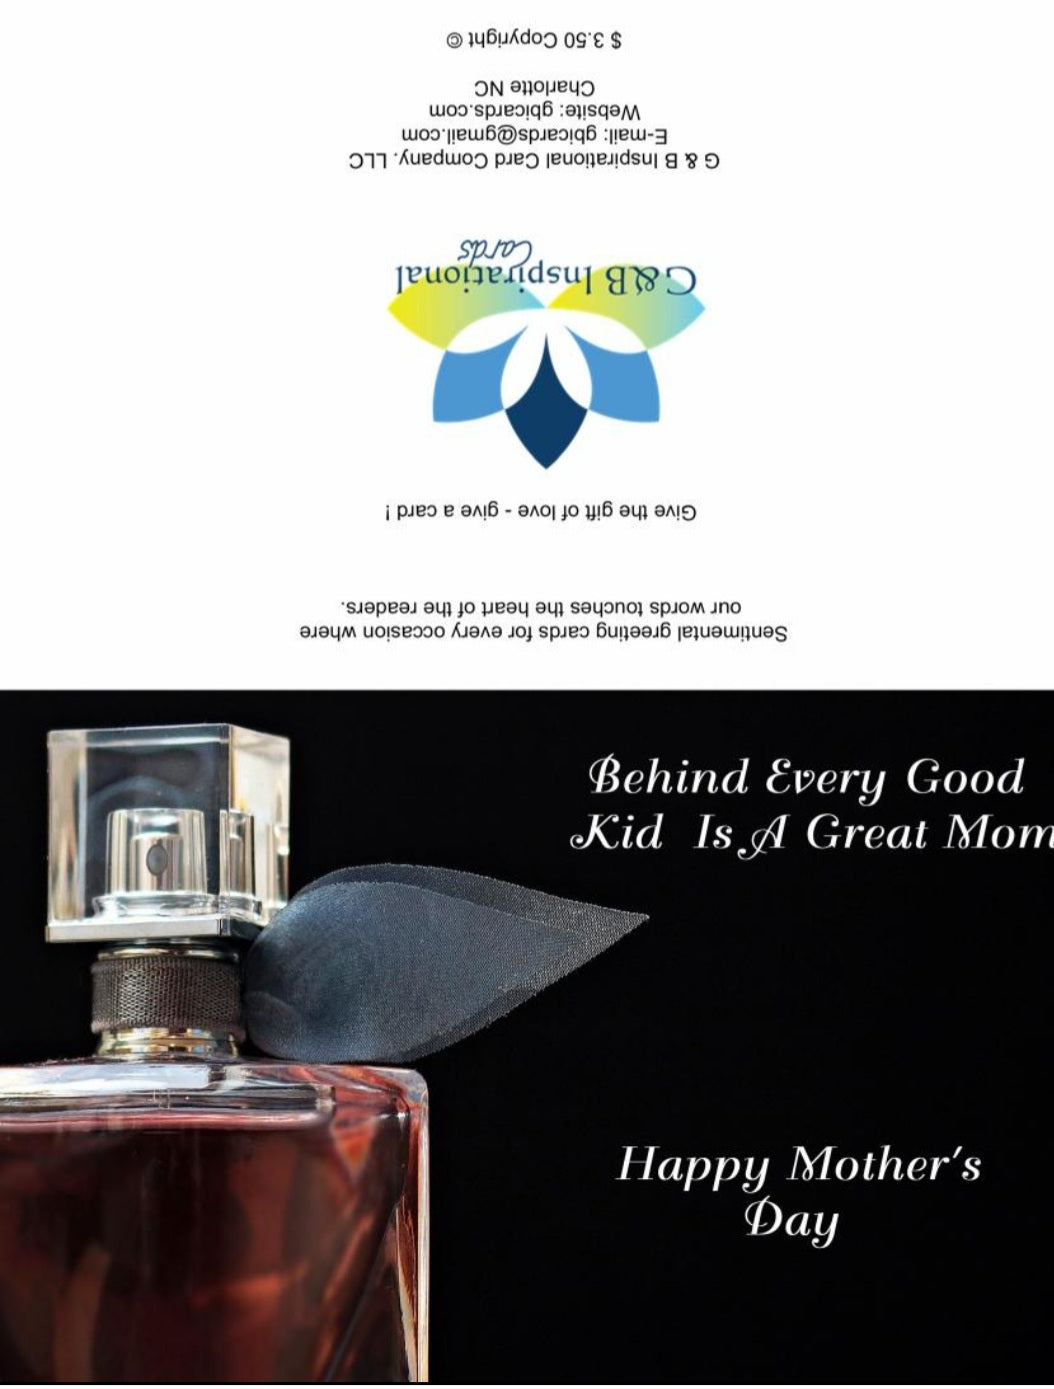 Happy Mother's Day Card #8